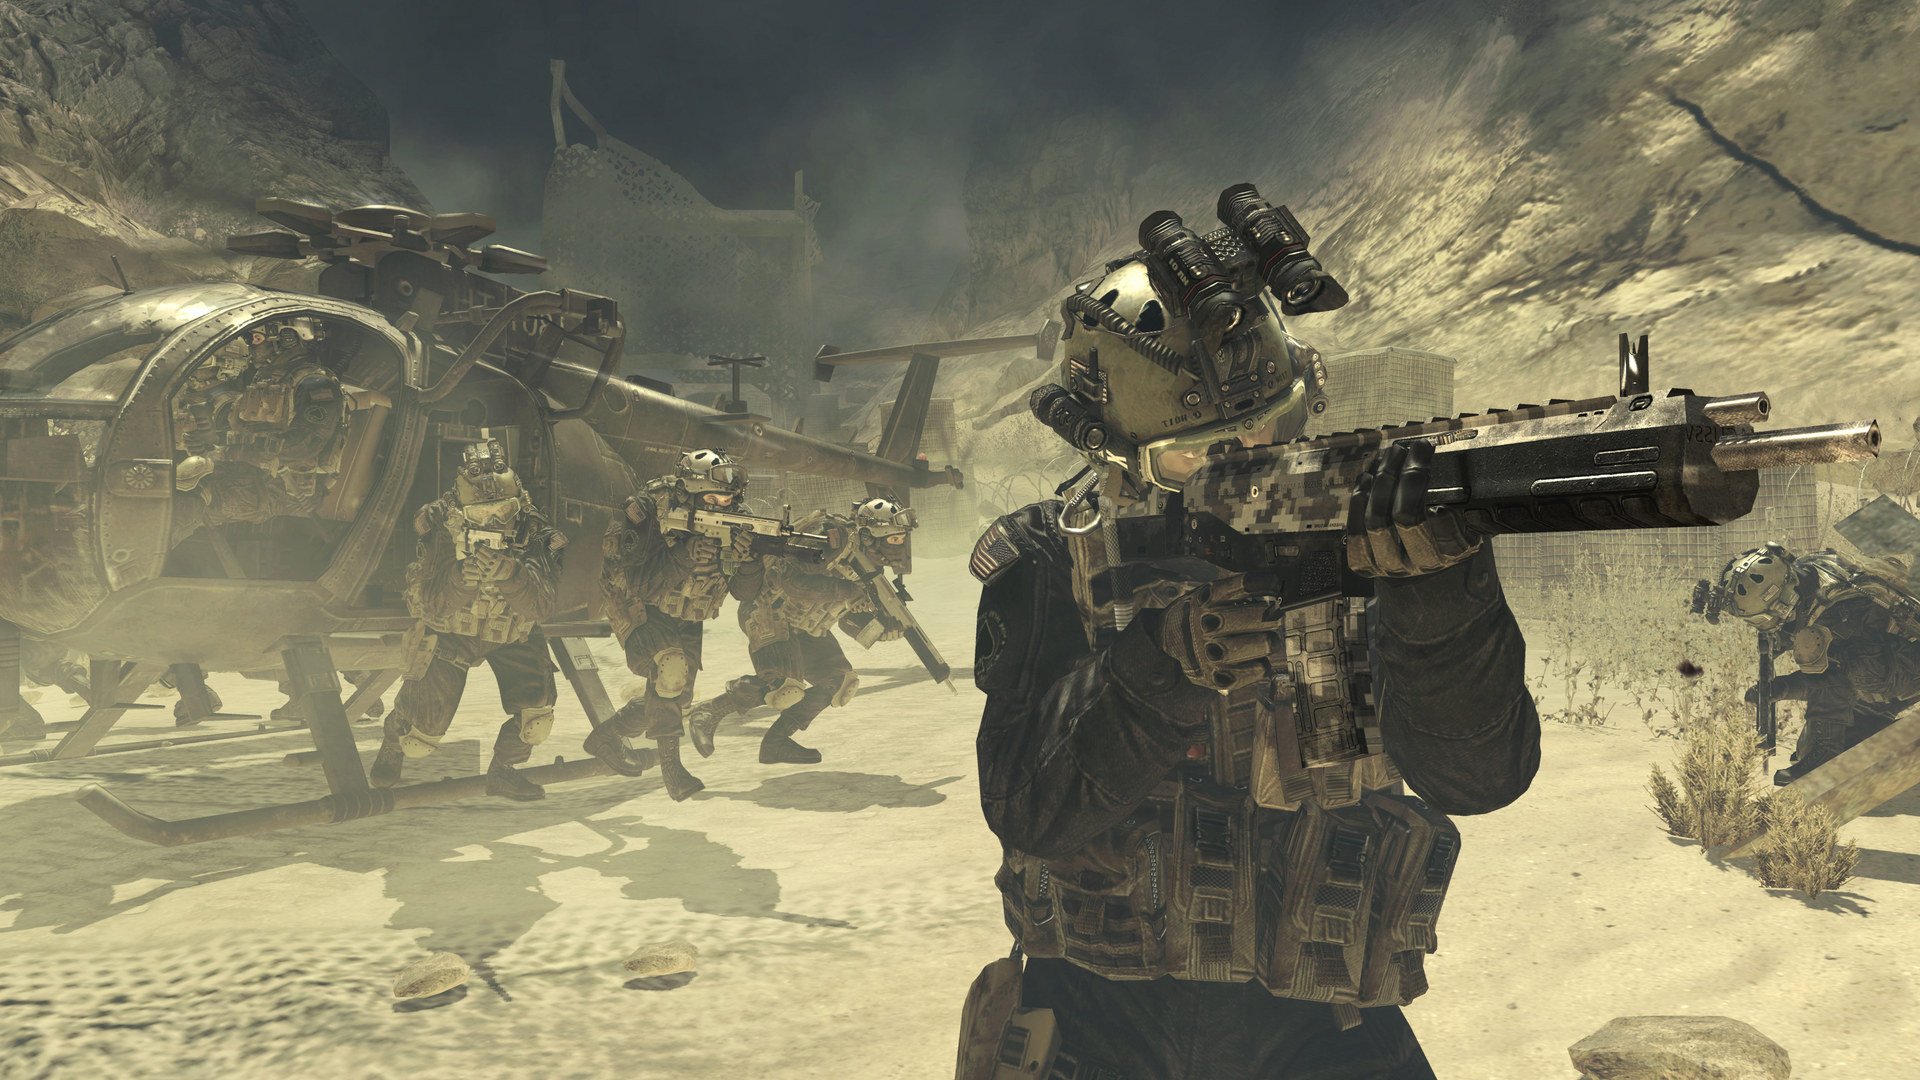 Call of Duty modders are making the Modern Warfare 2 Remastered